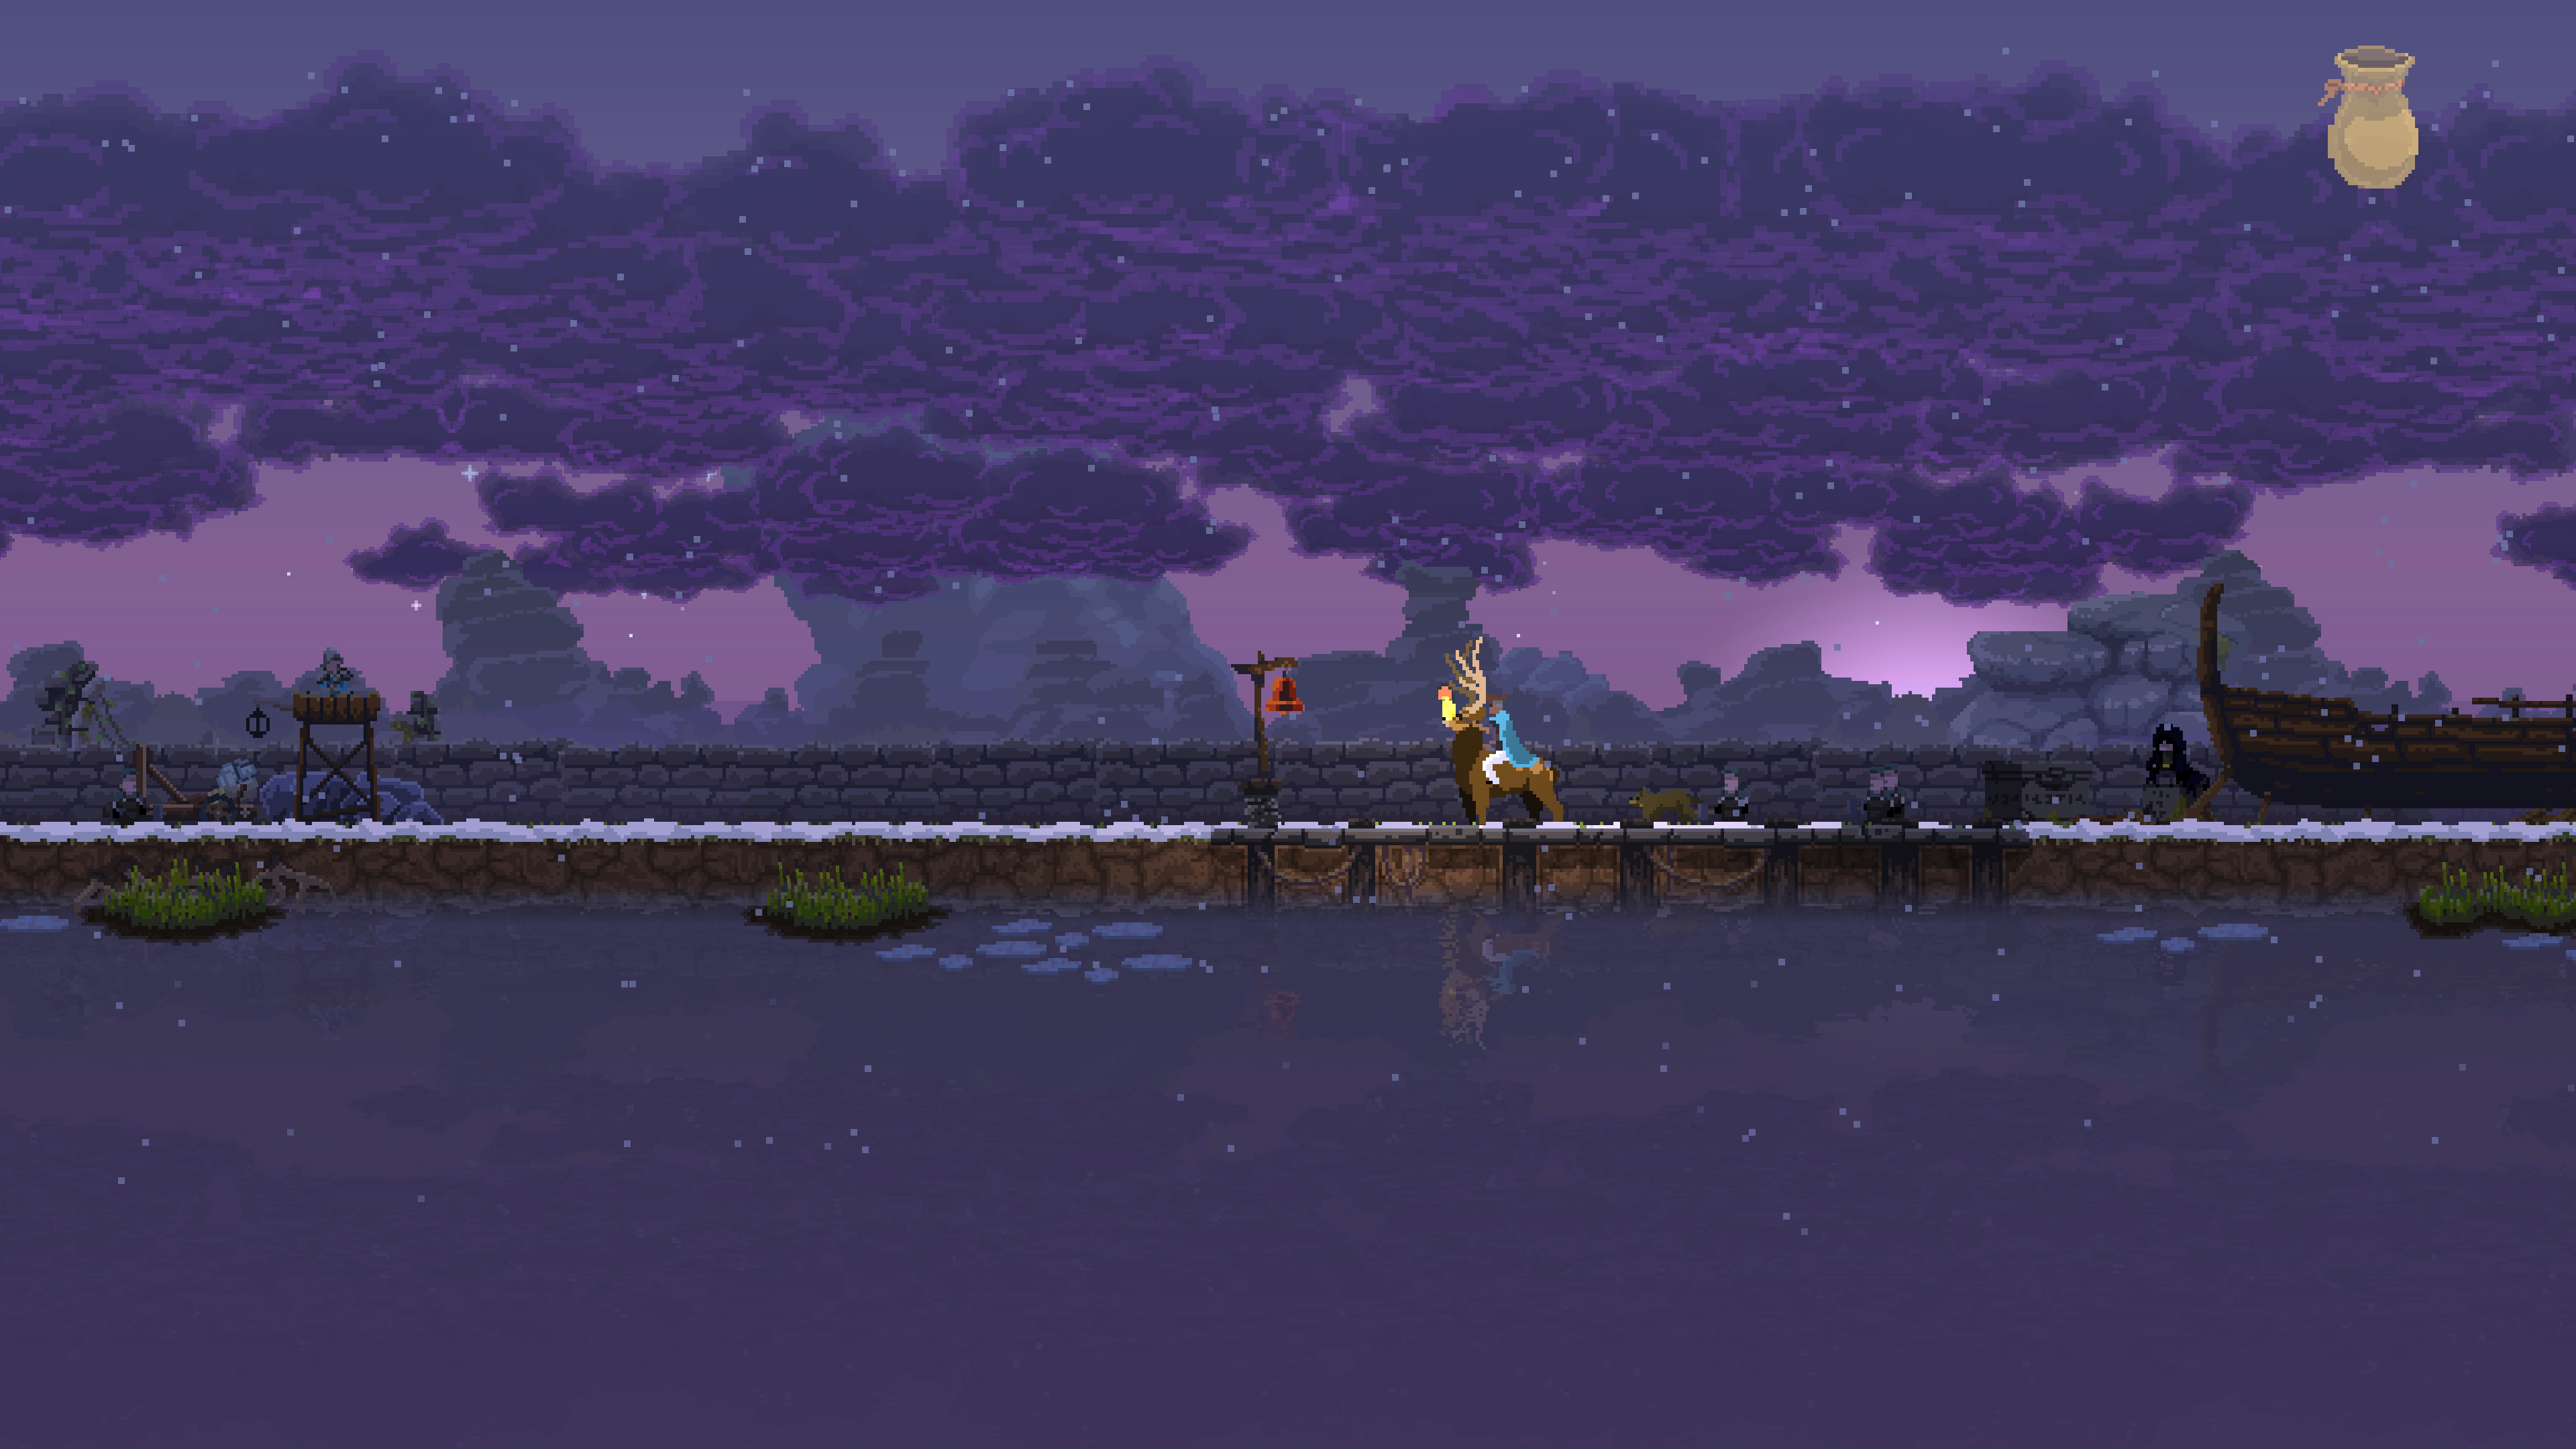 A screenshot showing a king riding on the back of a stag, with a purple sky with clouds in it and snow on the ground. There's a stone wall running along the length of the screen as well.